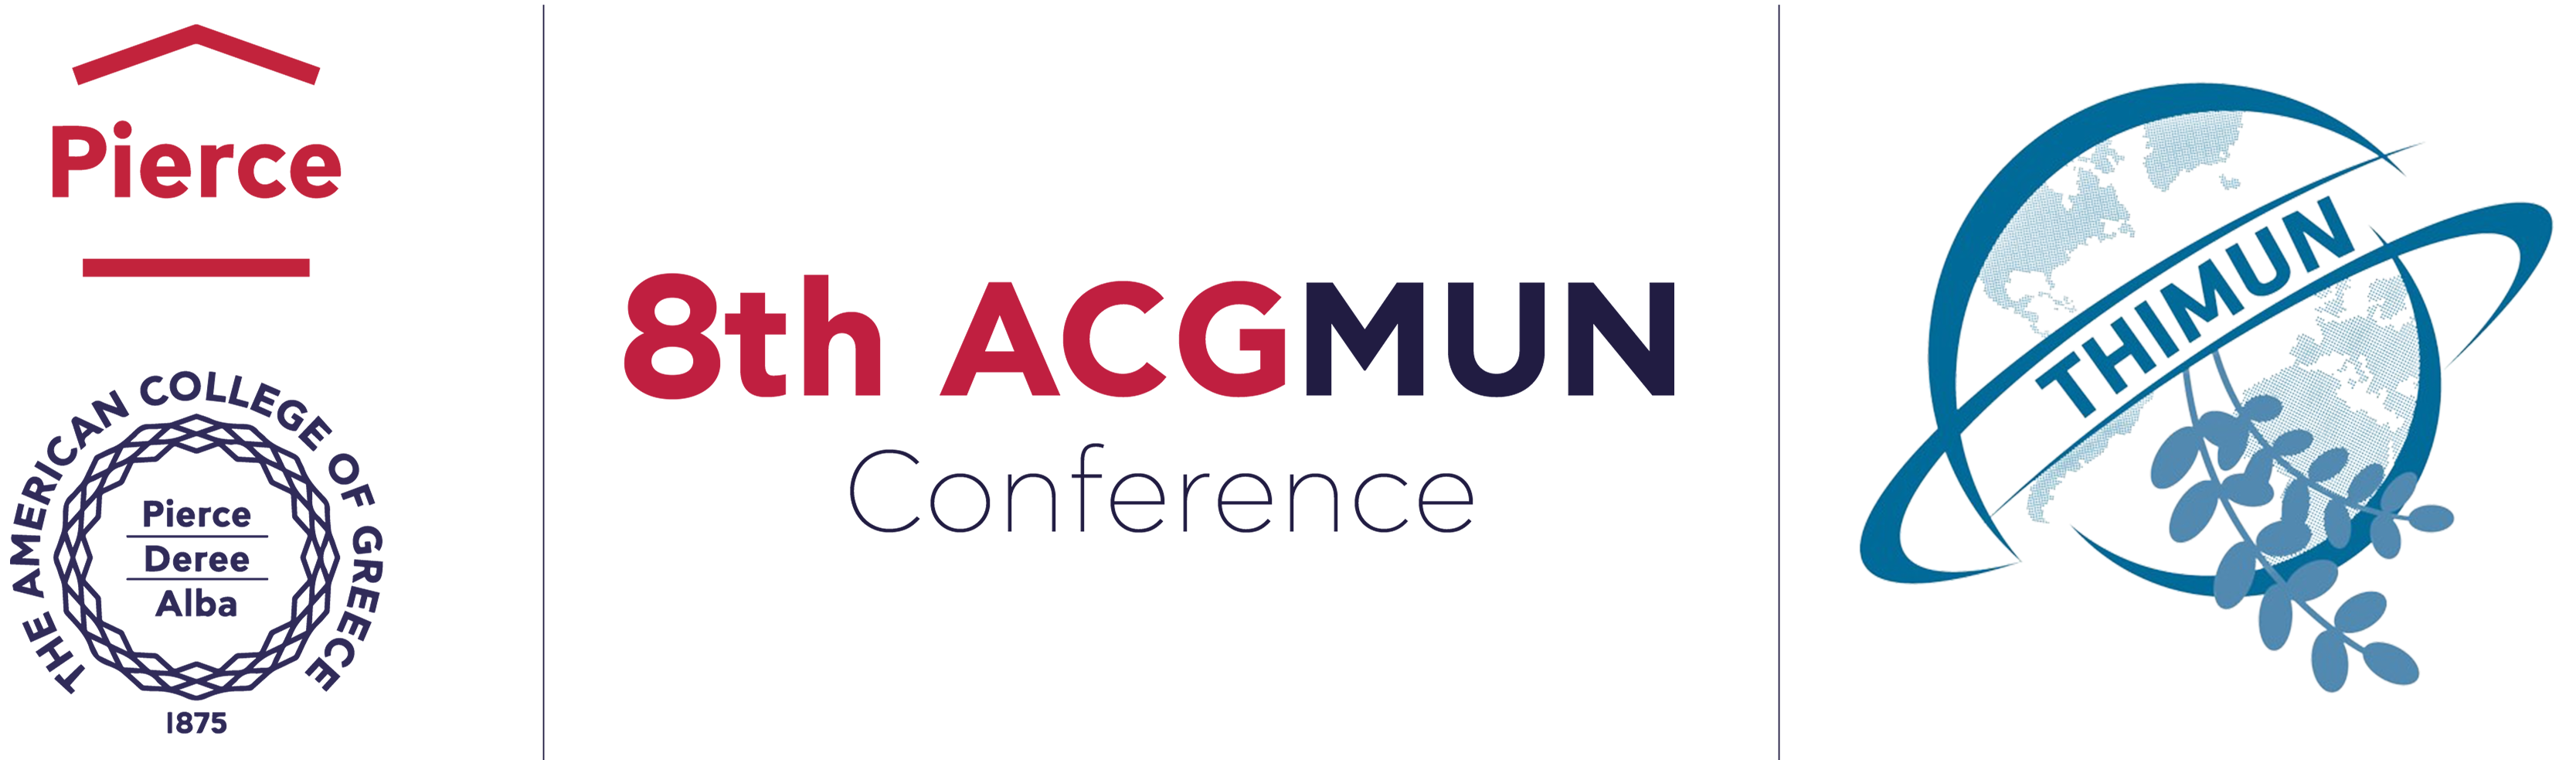 8th ACGMUN Conference